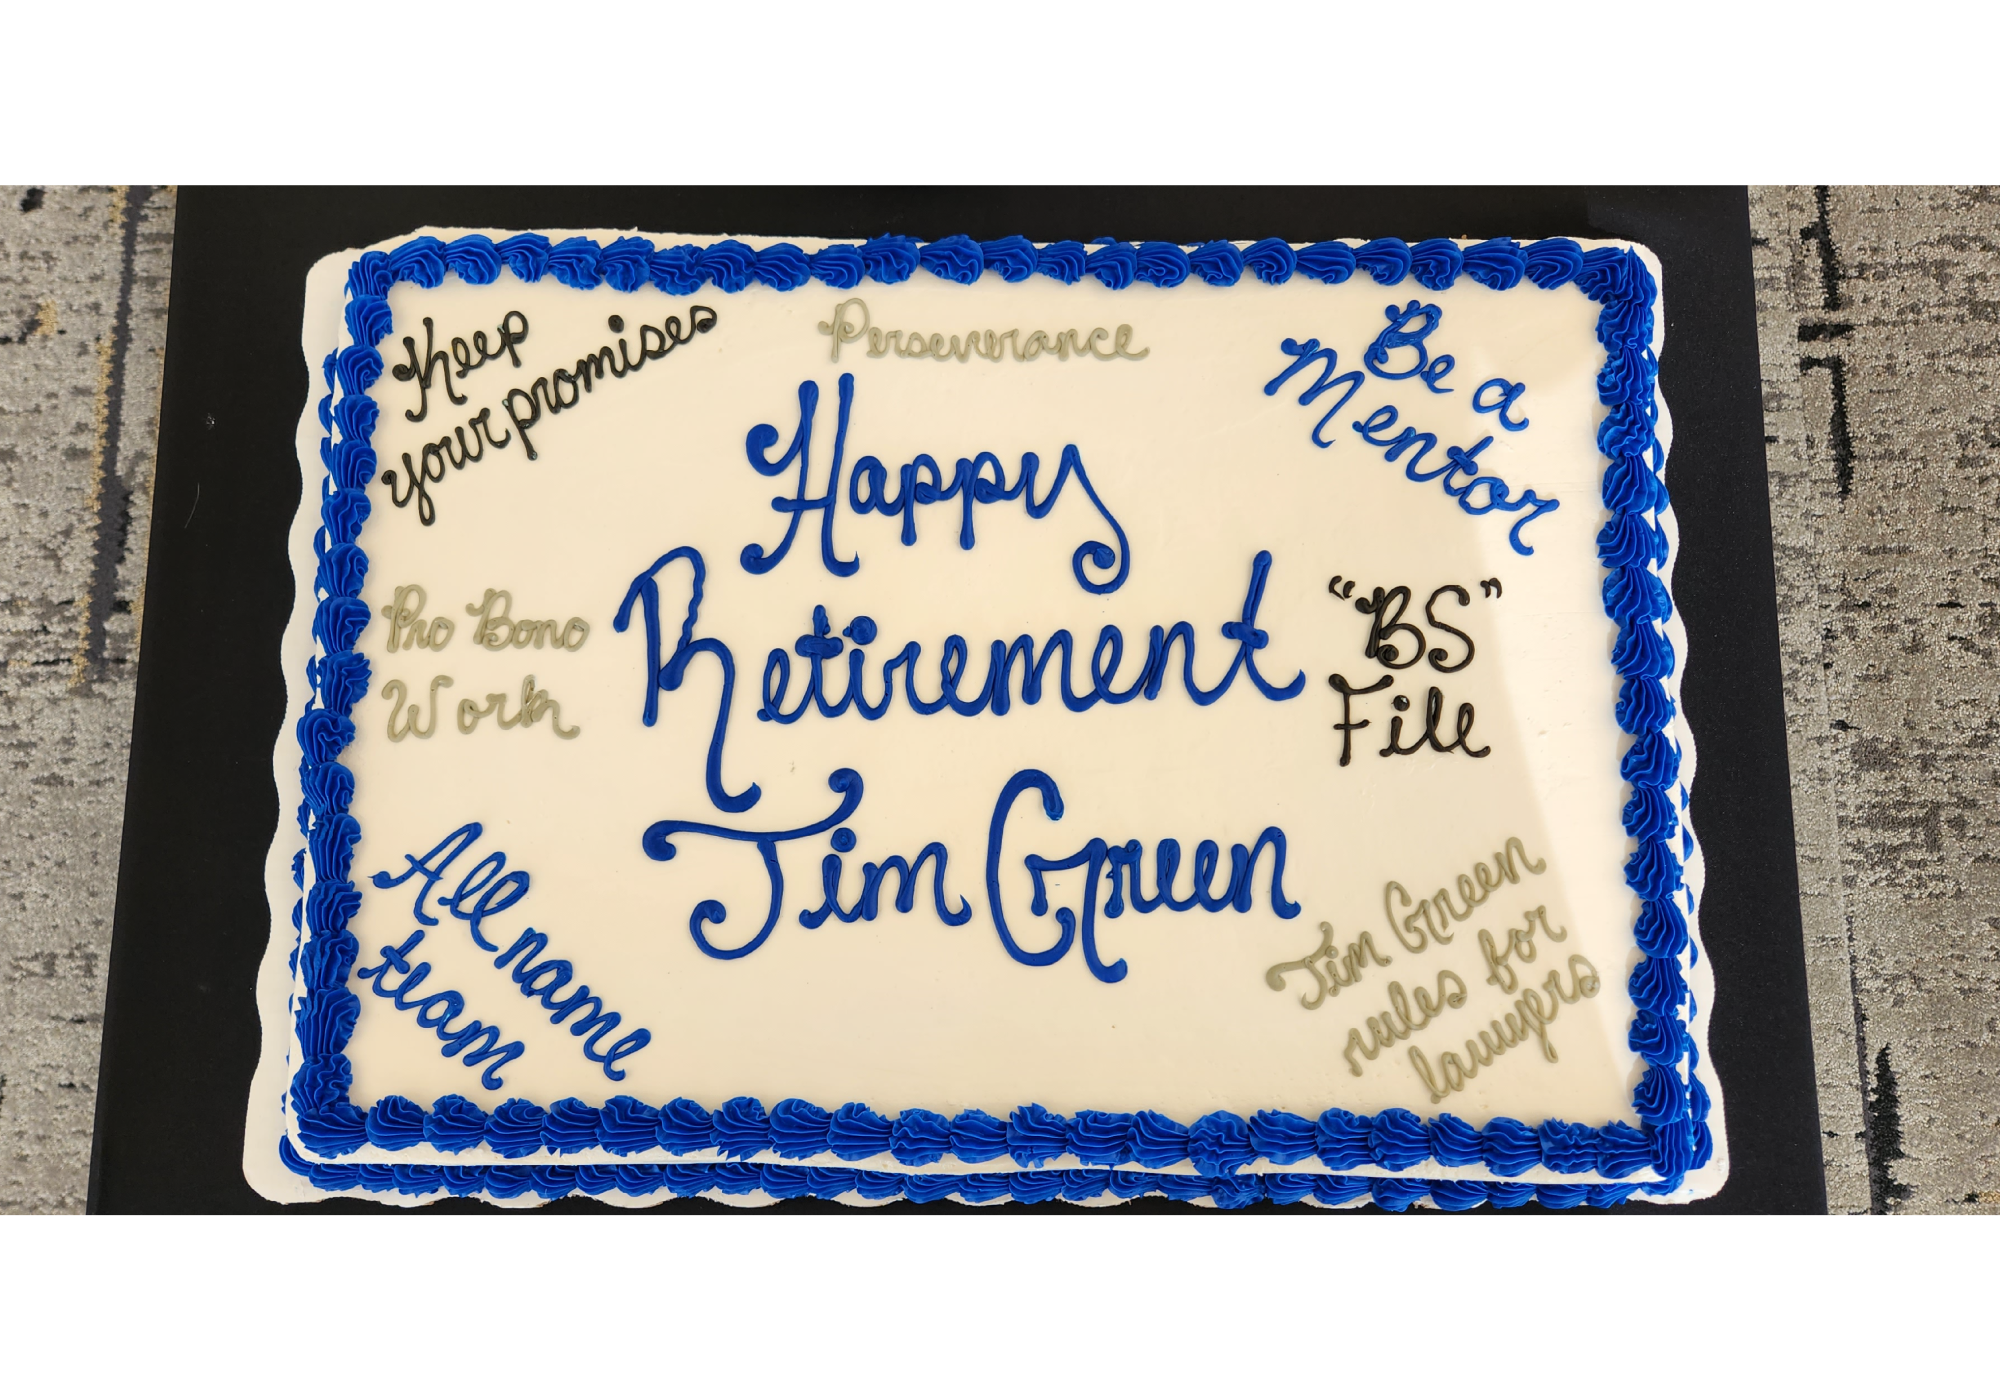 White cake with blue icing for Jim Green's retirement, quotes written on cake